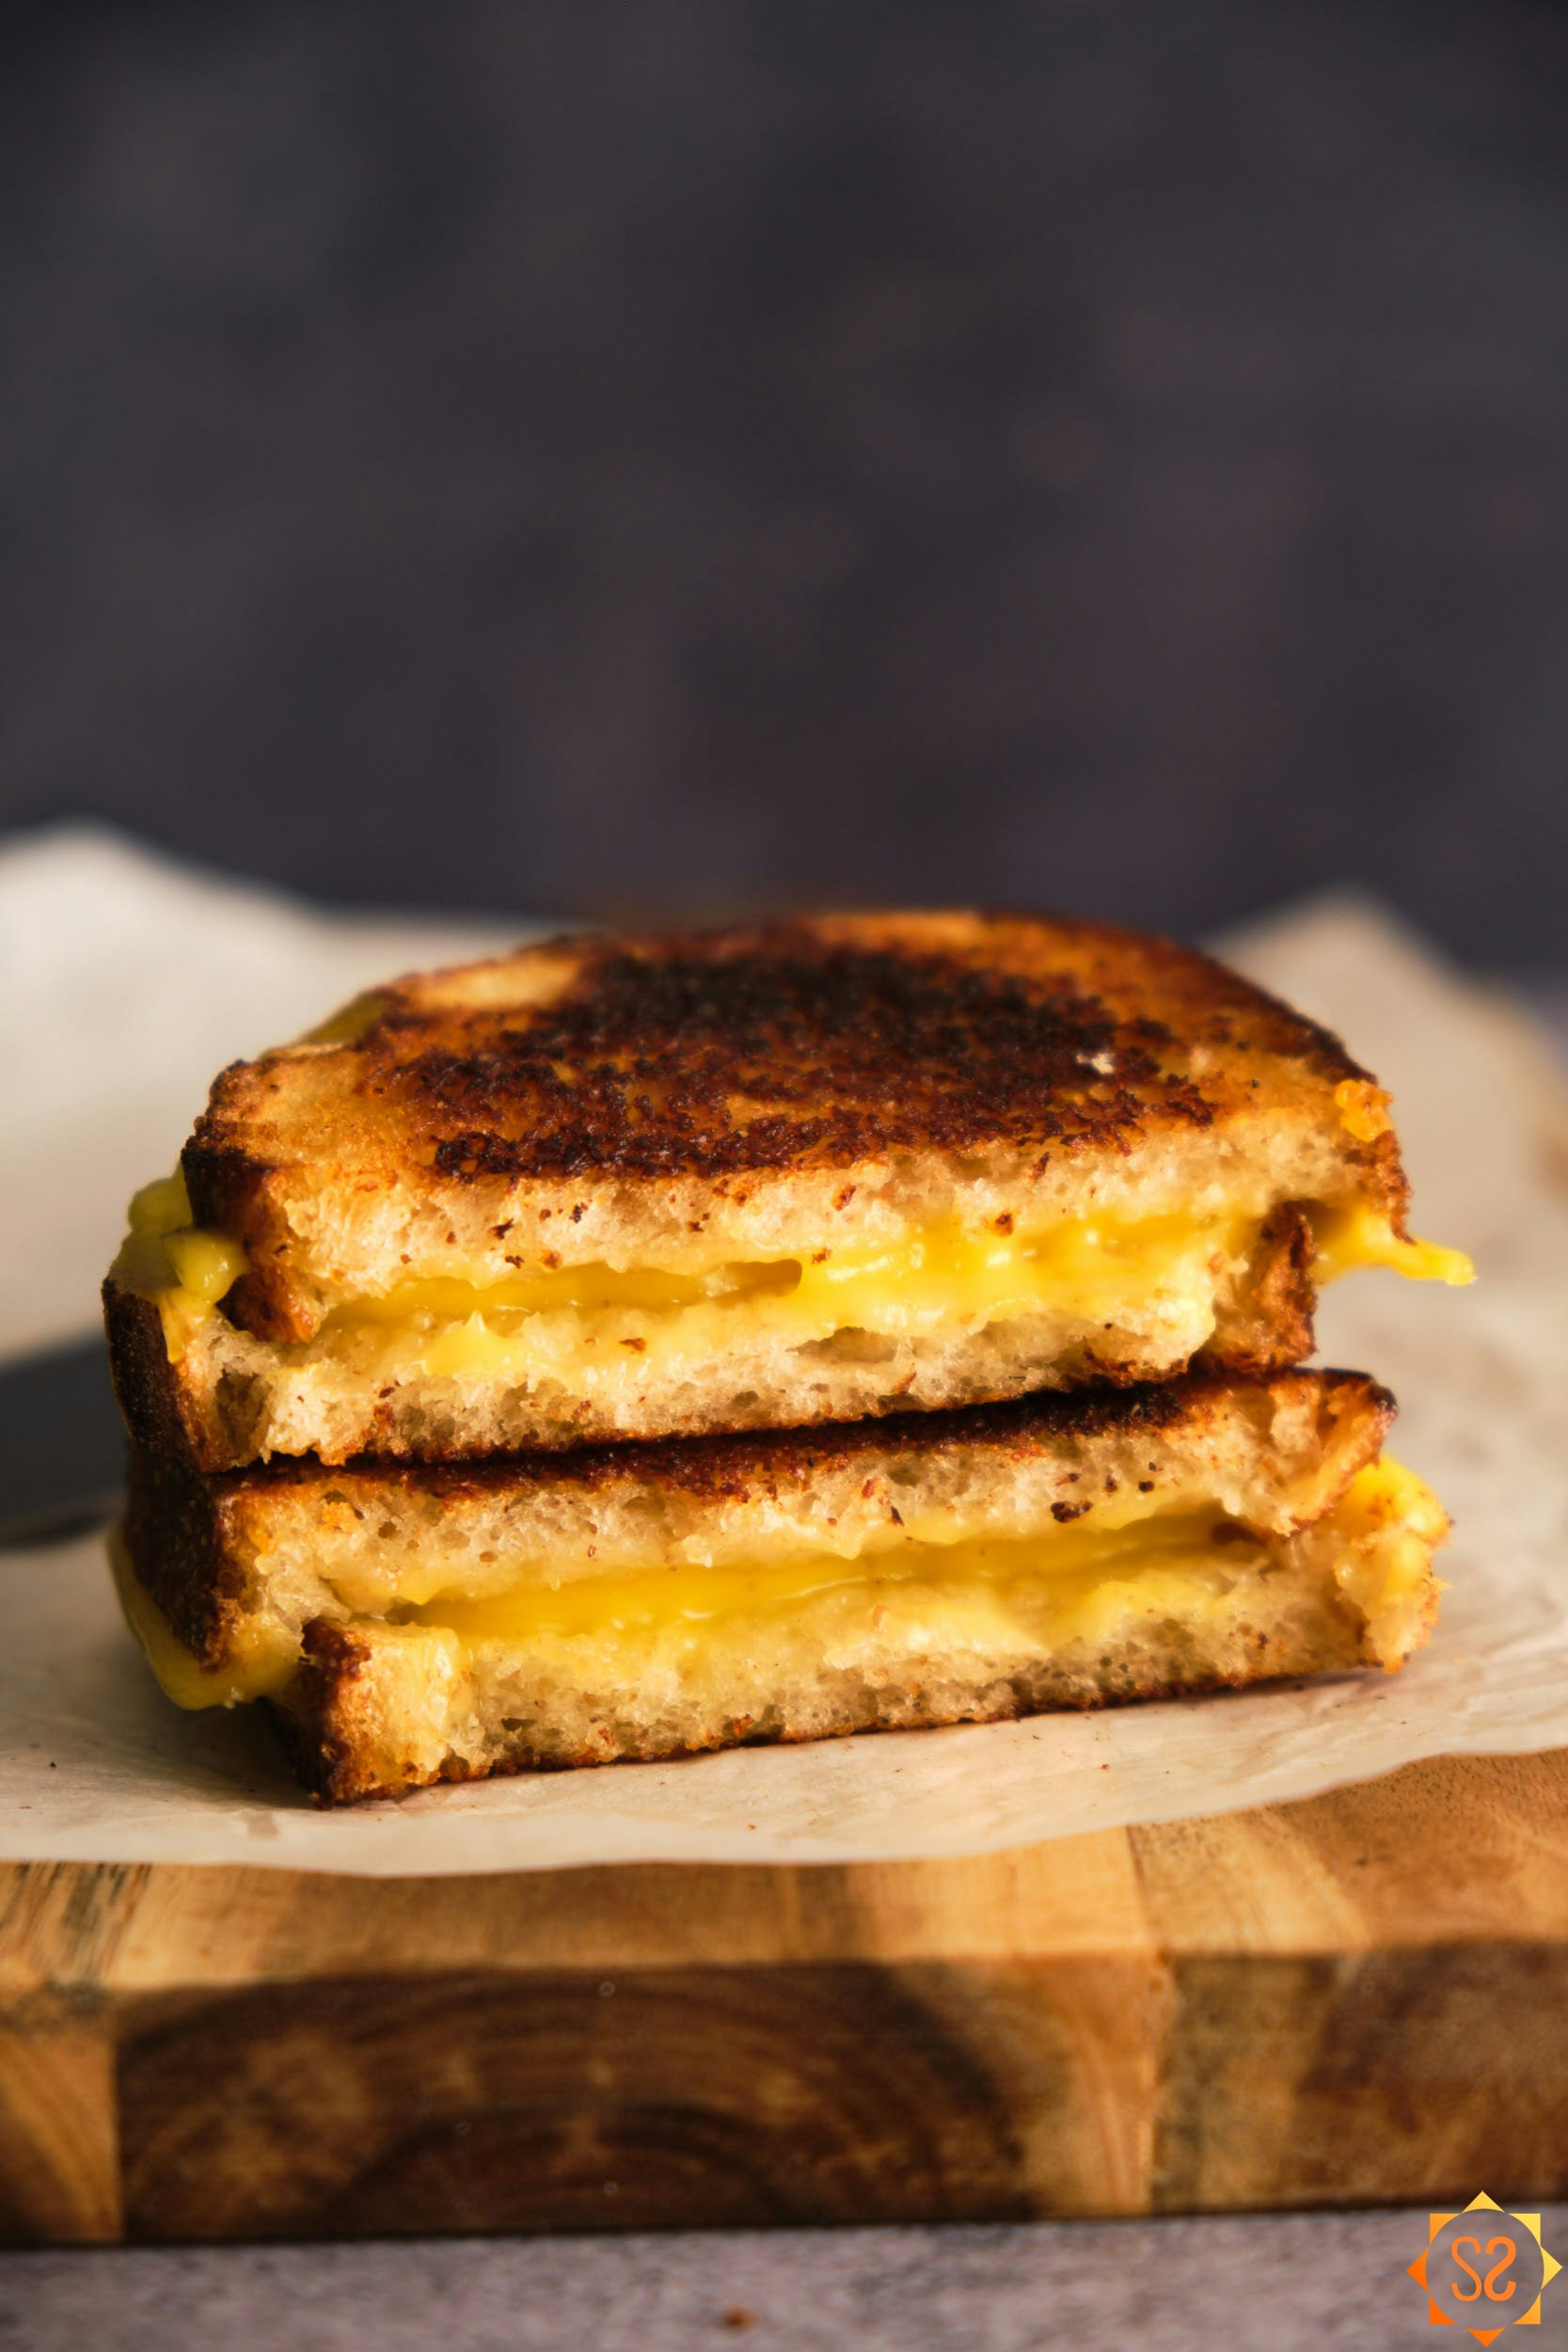 A side view of grilled cheese made with Chao creamy original, stacked